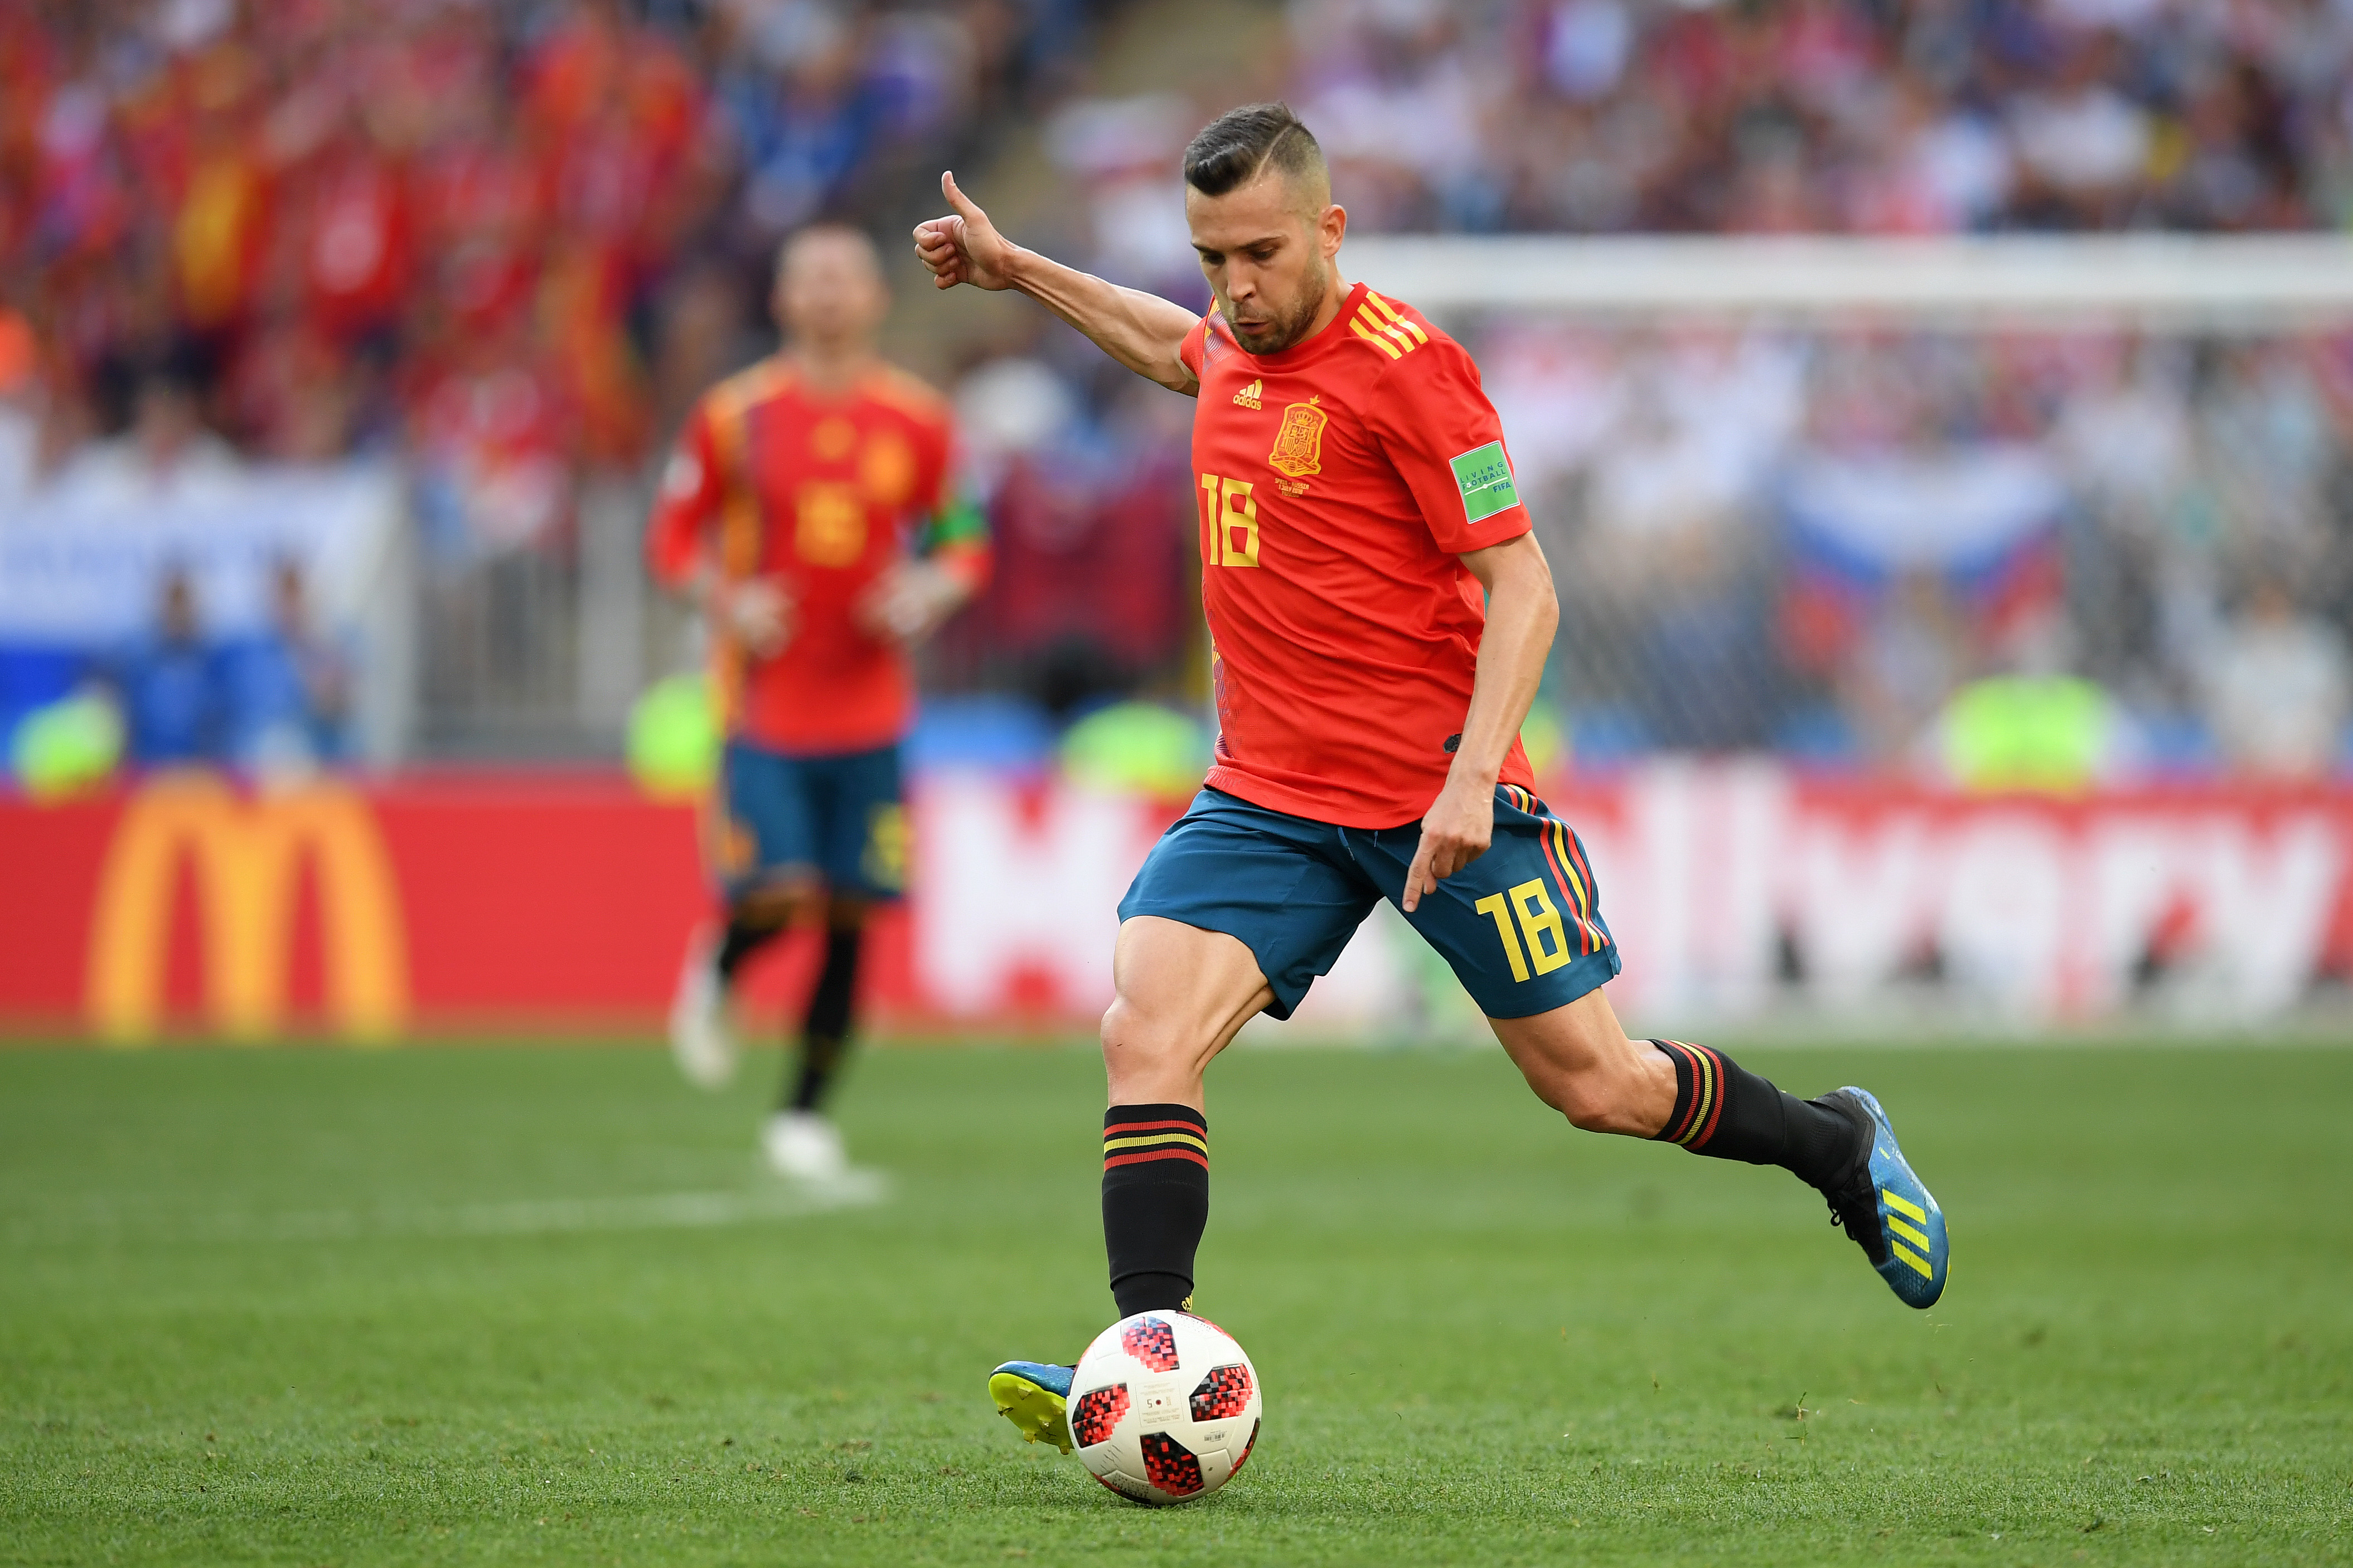 Can Alba cement his place in the Spain squad? (Photo by Matthias Hangst/Getty Images)